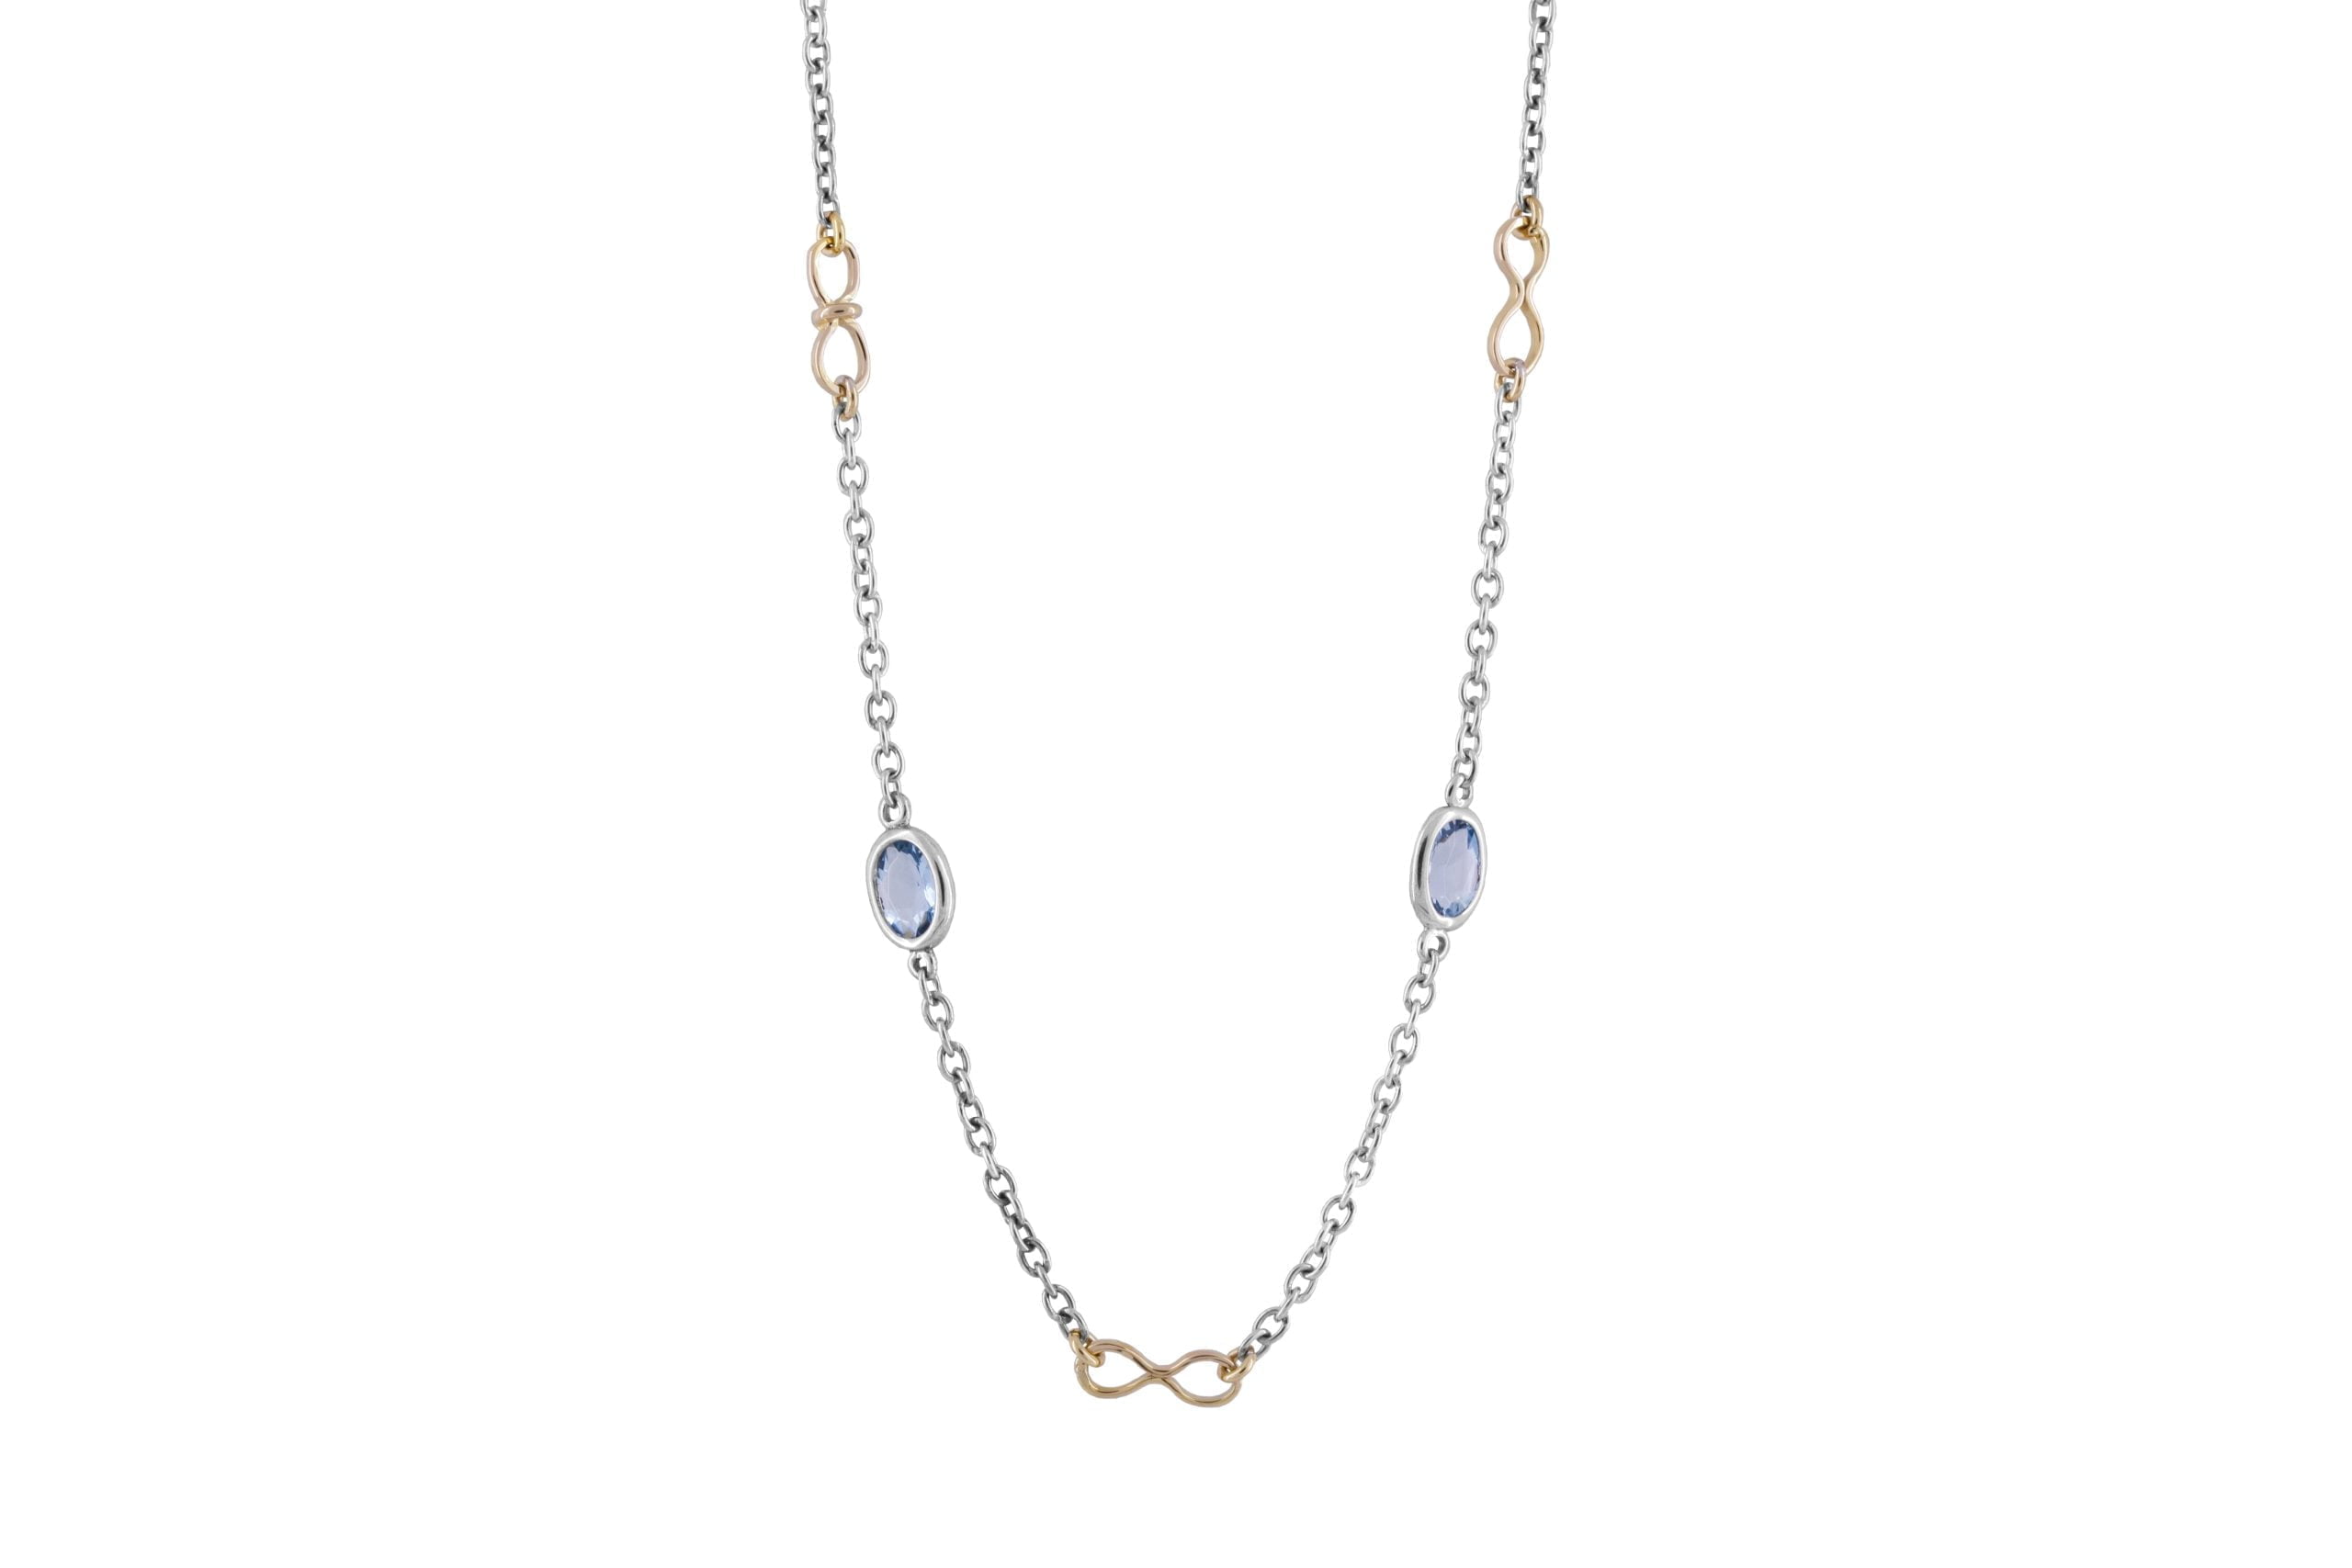 Blue Topaz Infinity Necklace in 9ct Yellow Gold & Silver